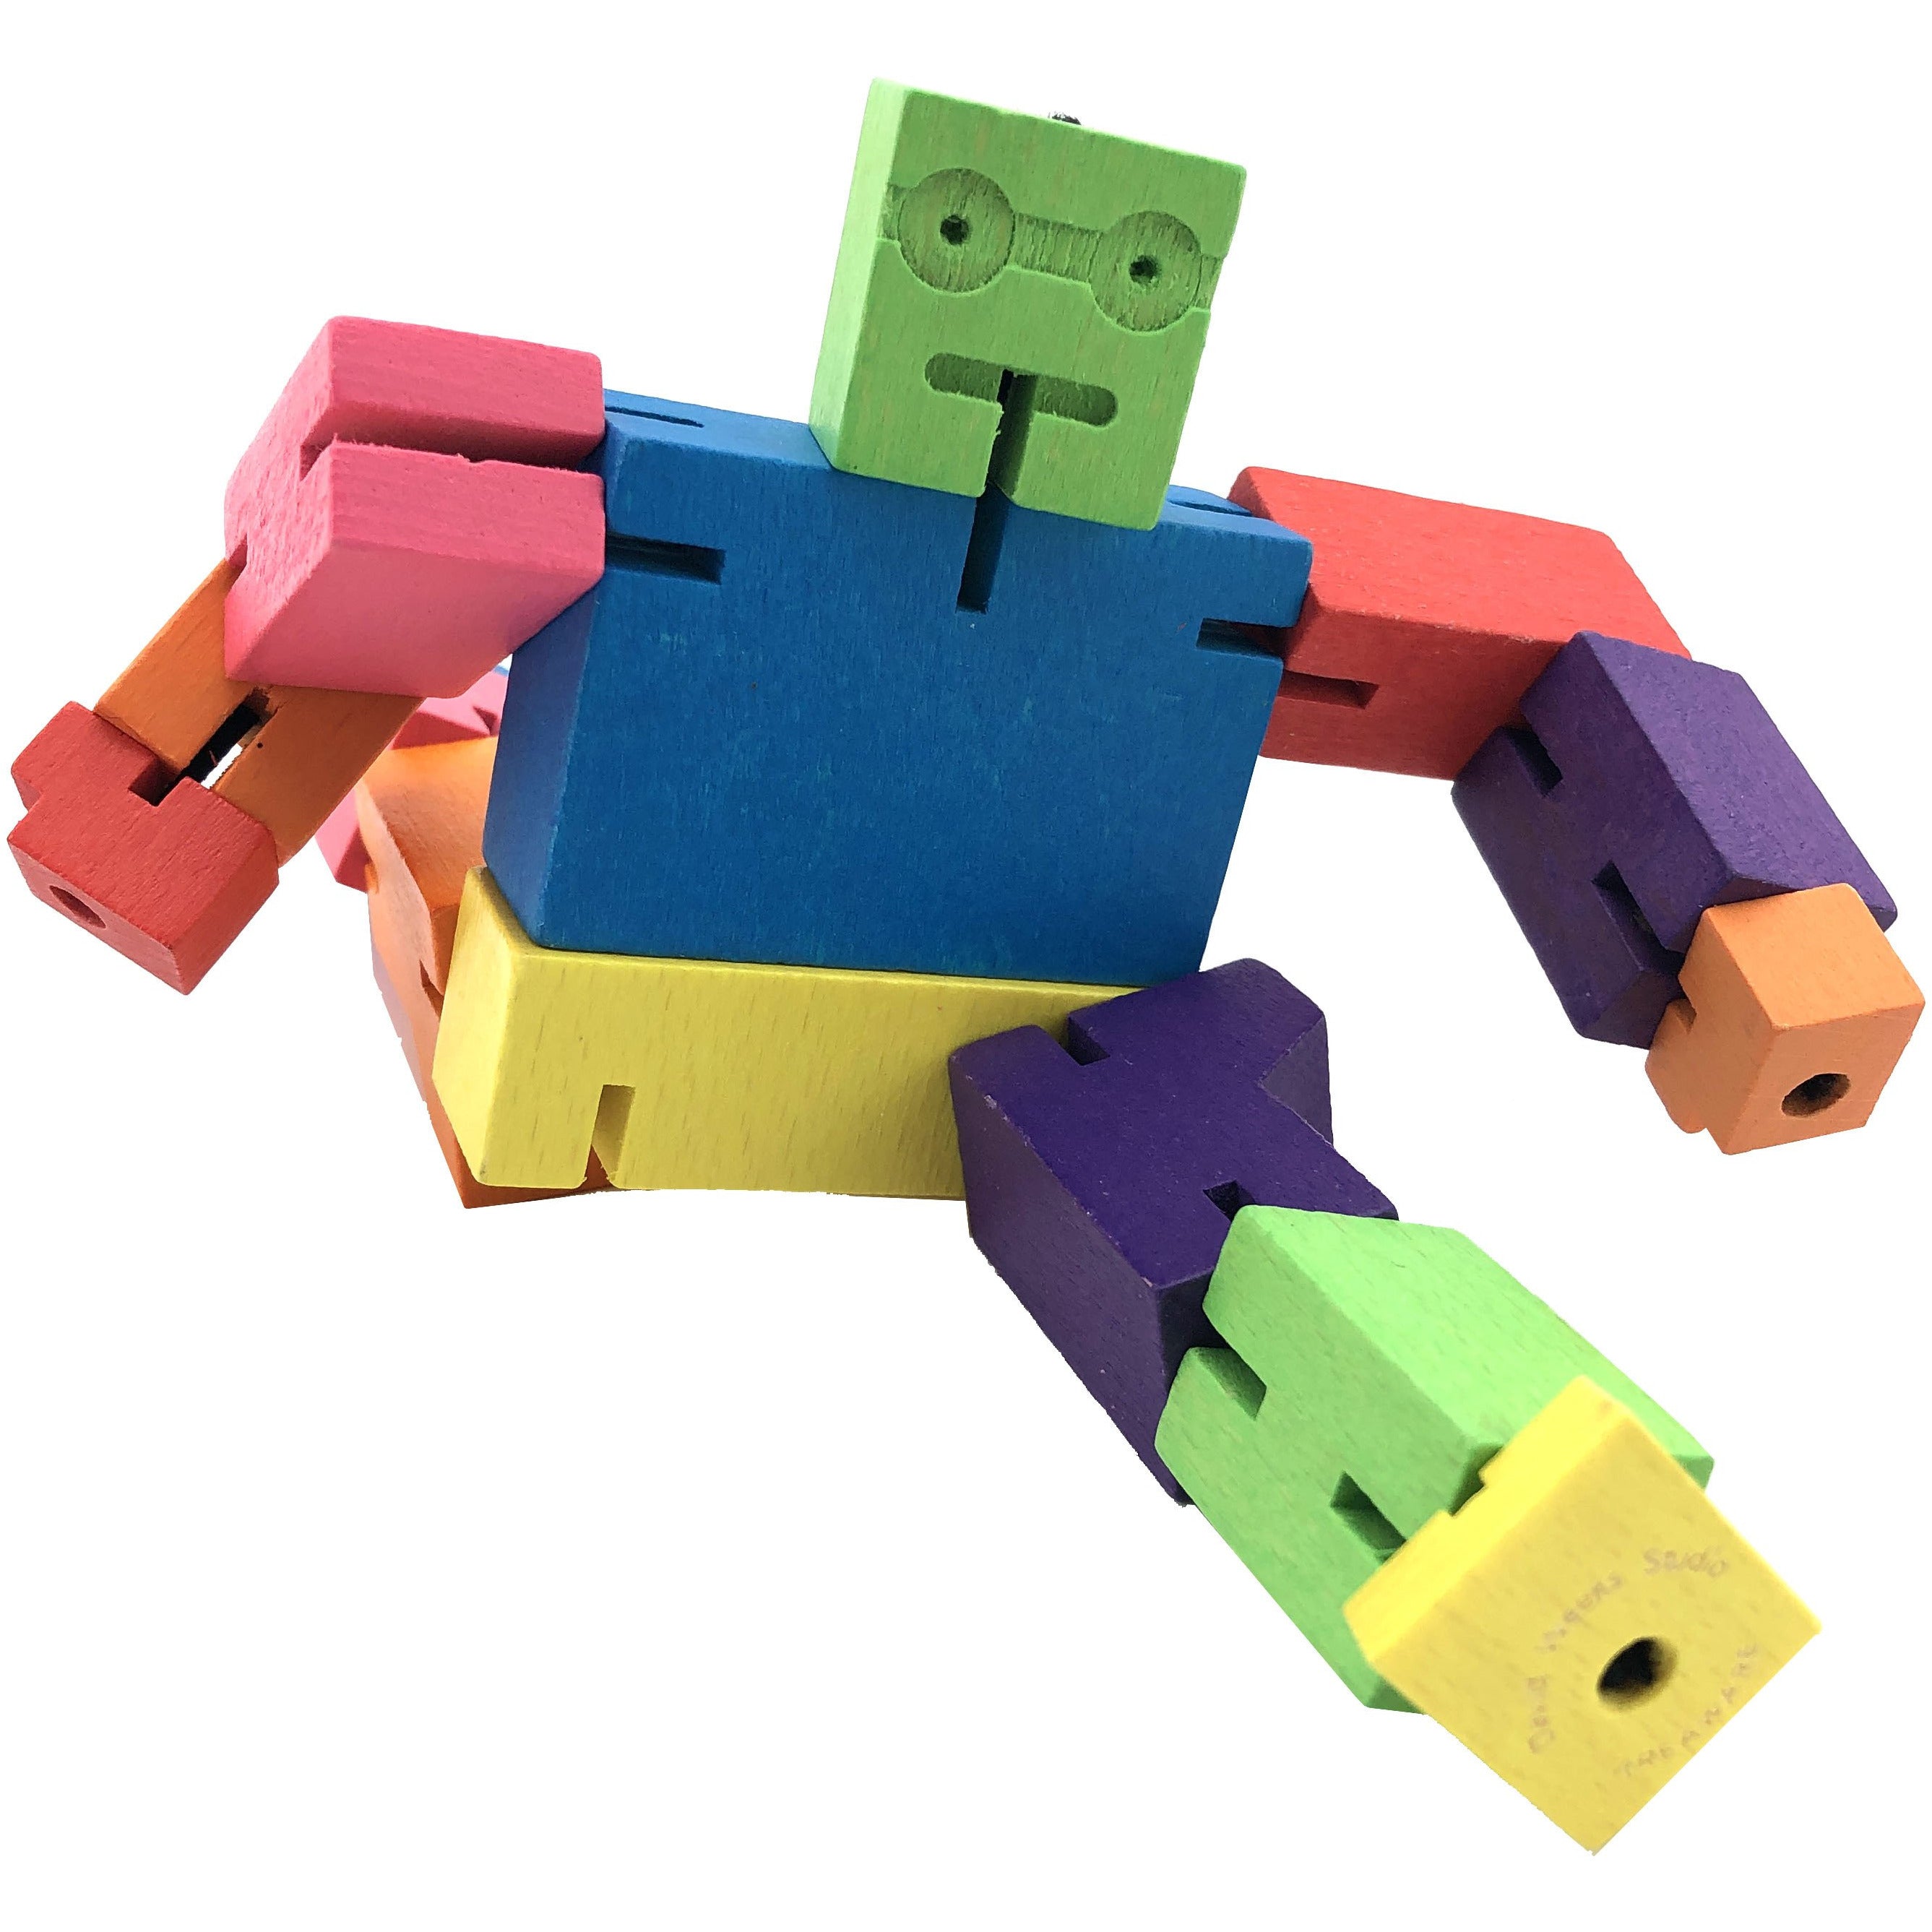 Areaware Mini Cubebot / Wooden Toy Robot / Multicoloured